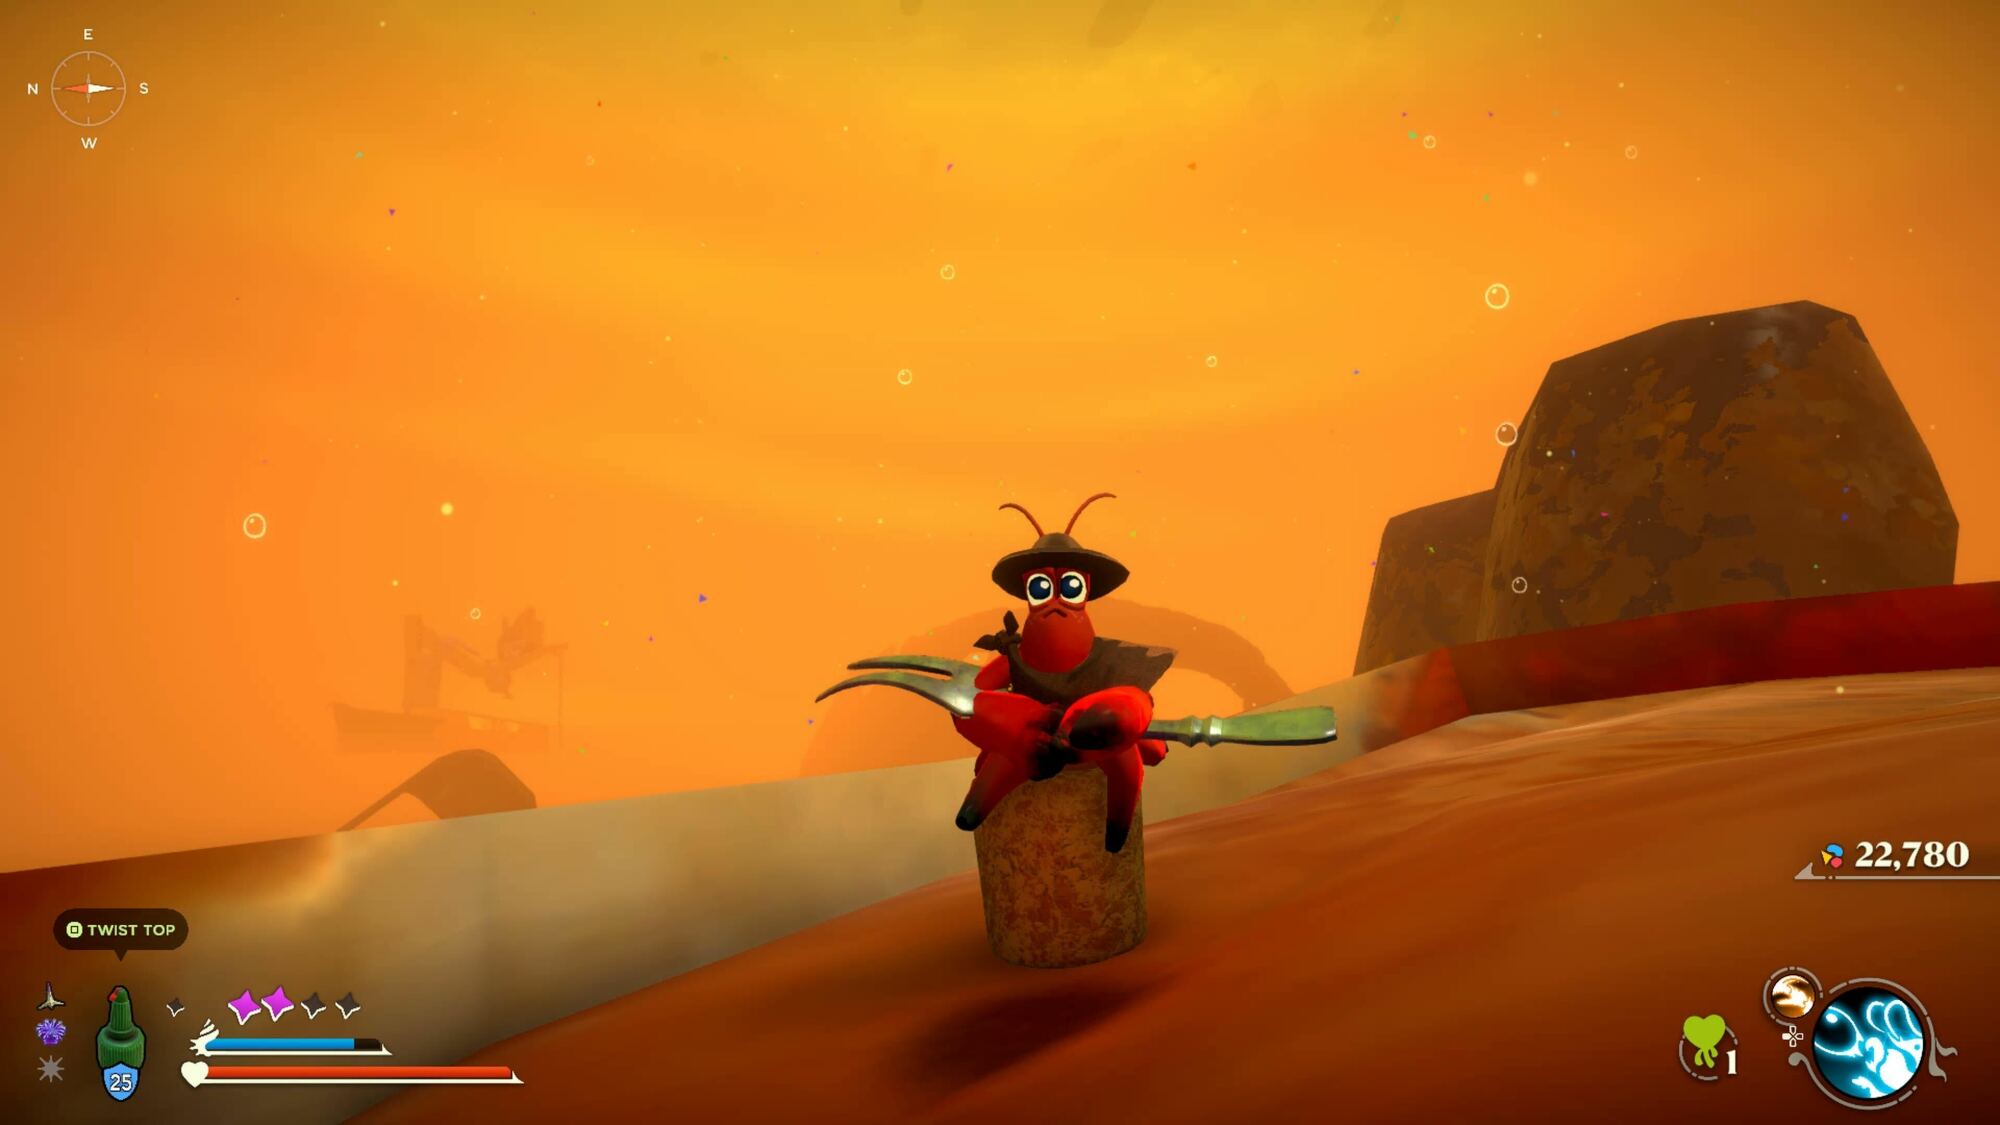 A cartoonish red crab with large eyes, wielding a fork, perched on a cork, against an orange backdrop with floating particles.